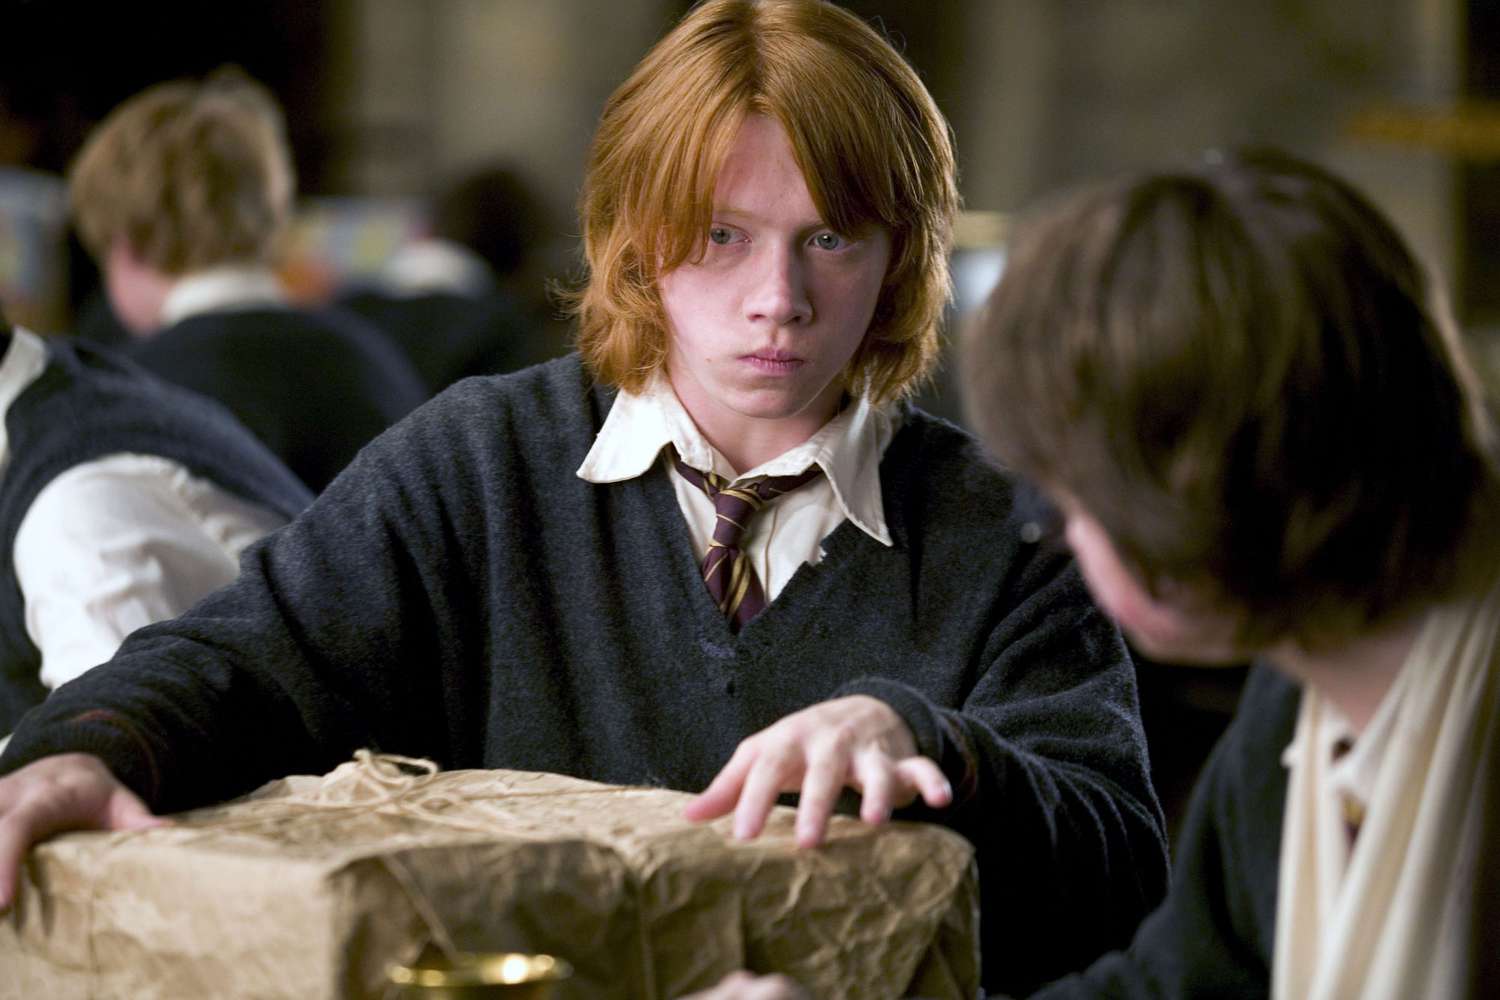 HARRY POTTER AND THE GOBLET OF FIRE, Rupert Grint, 2005, (c) Warner Brothers / courtesy Everett Coll